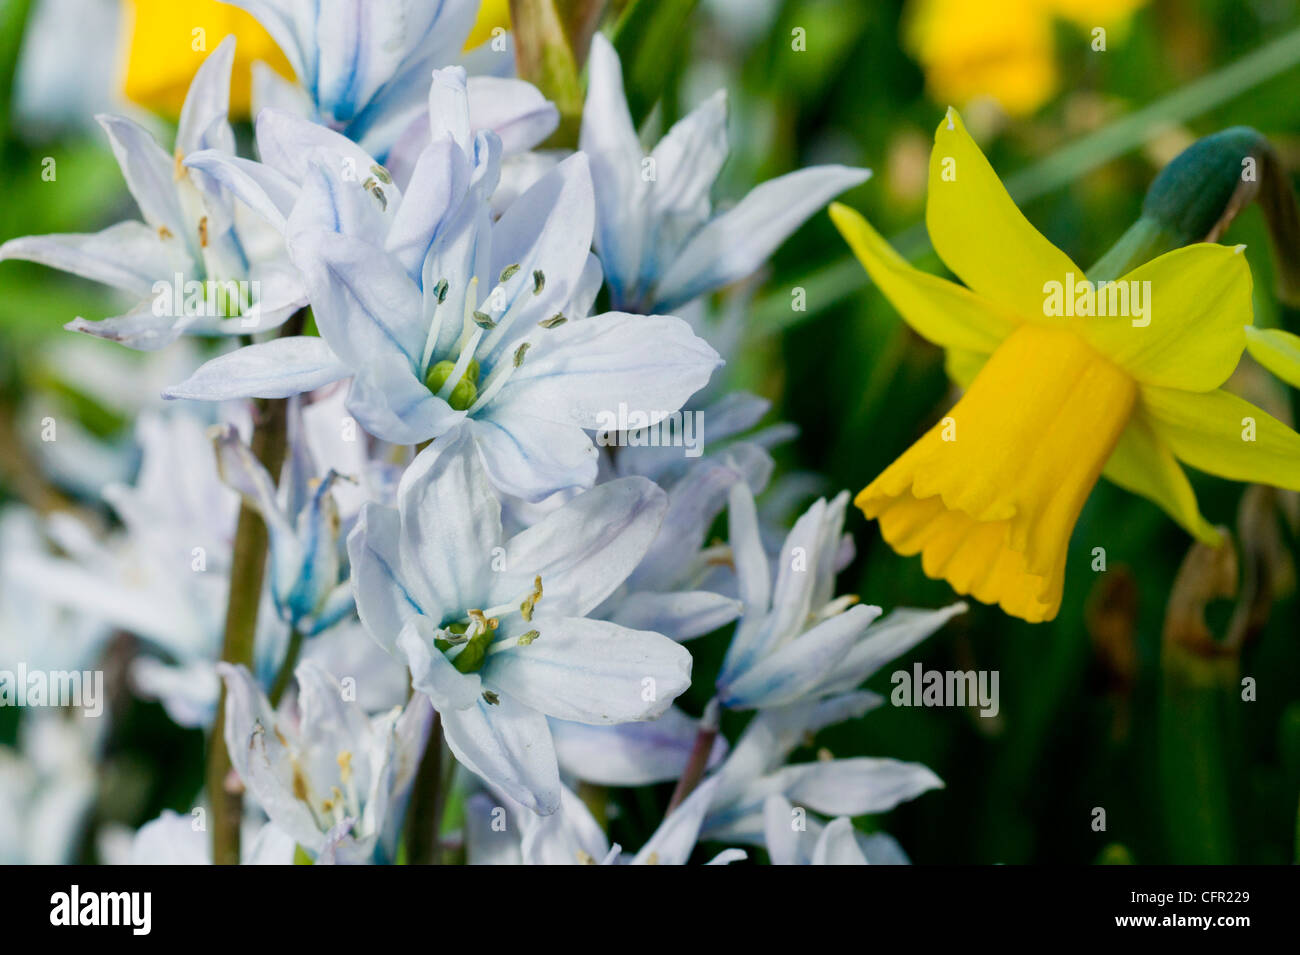 Star Hyacinth scilla mischtschenkoana with a Daffodil in Spring Stock Photo